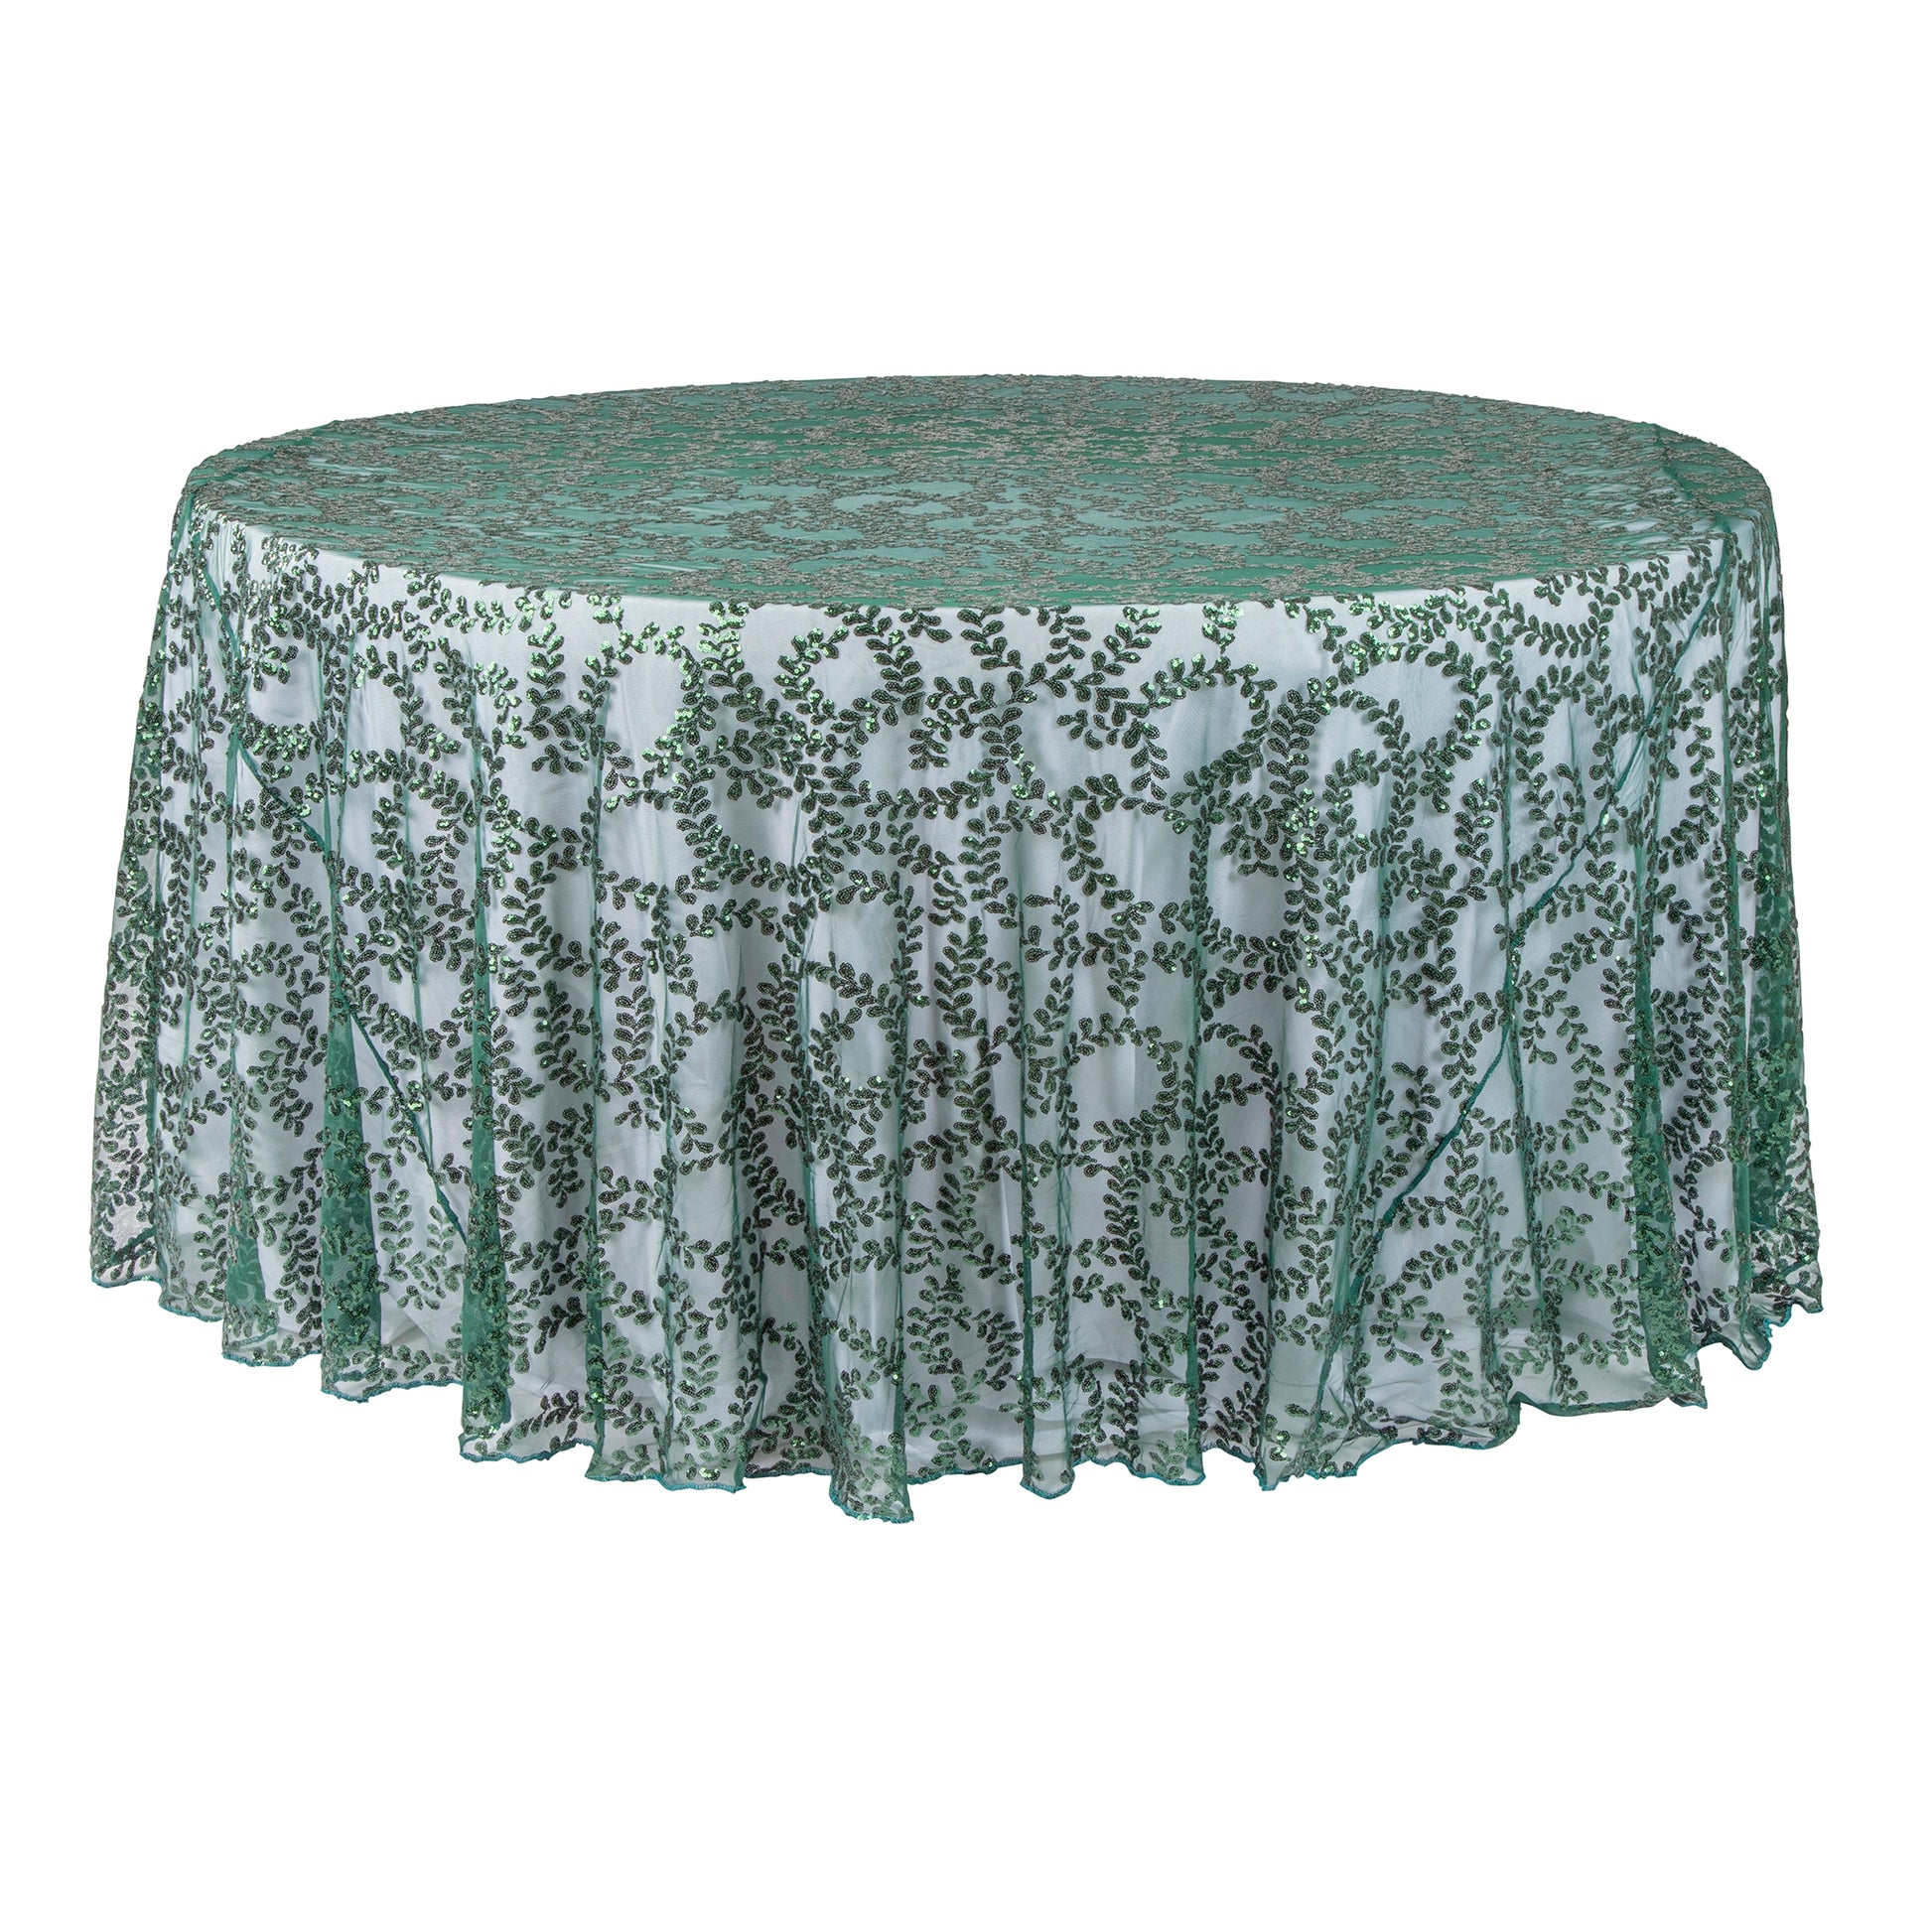 Sequin Vine Tablecloth Overlay 120 Round - Emerald Green